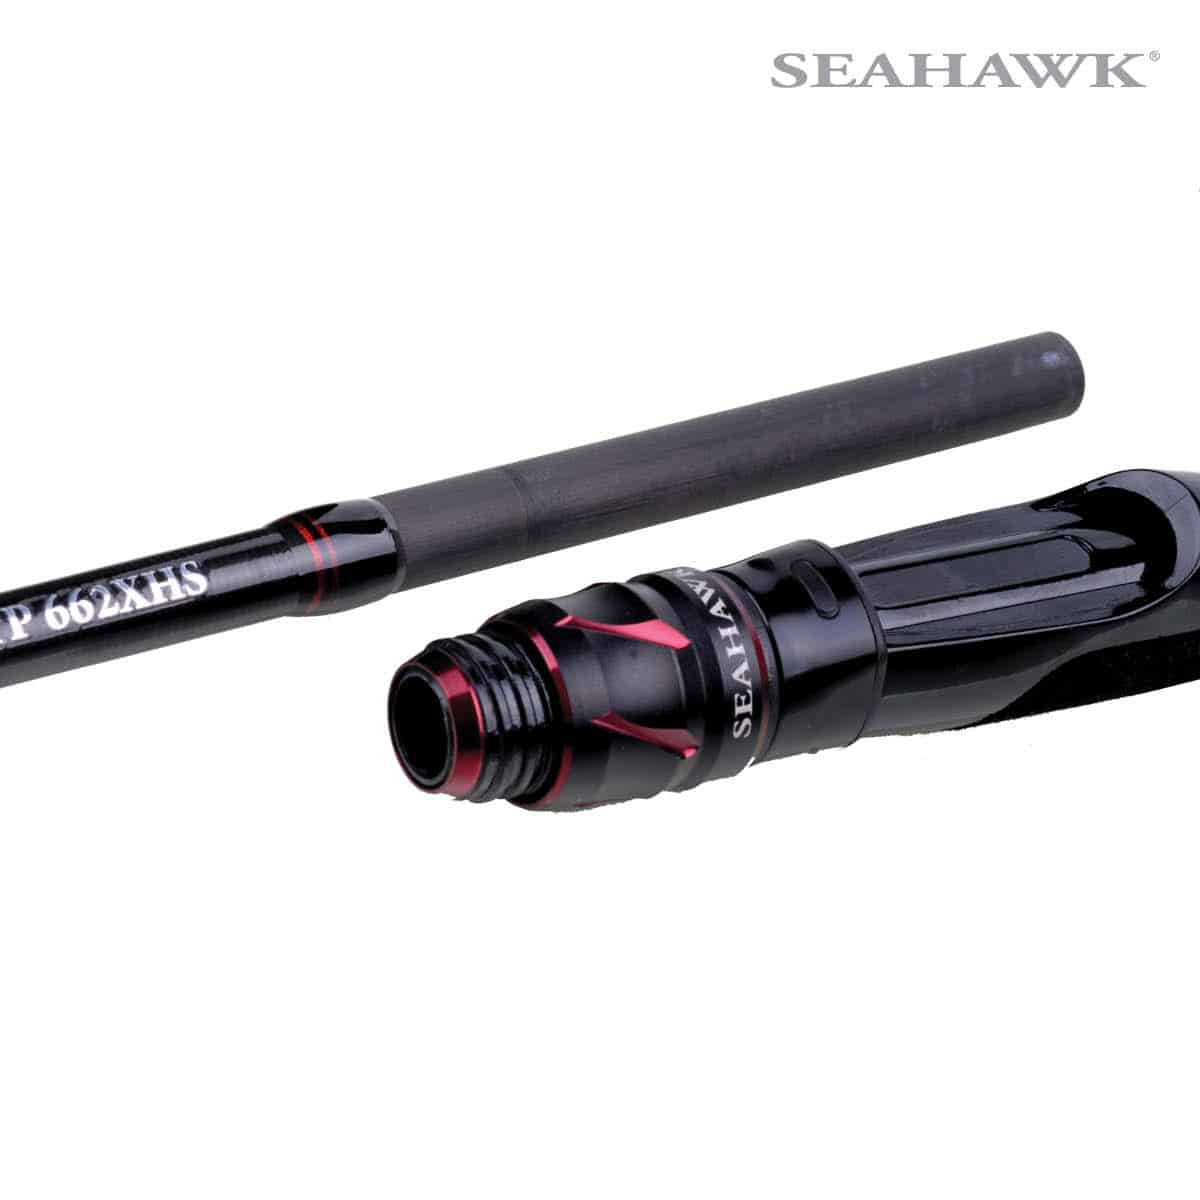 SEAHAWK FISHING - Tournament Pro Rod (Official Video)